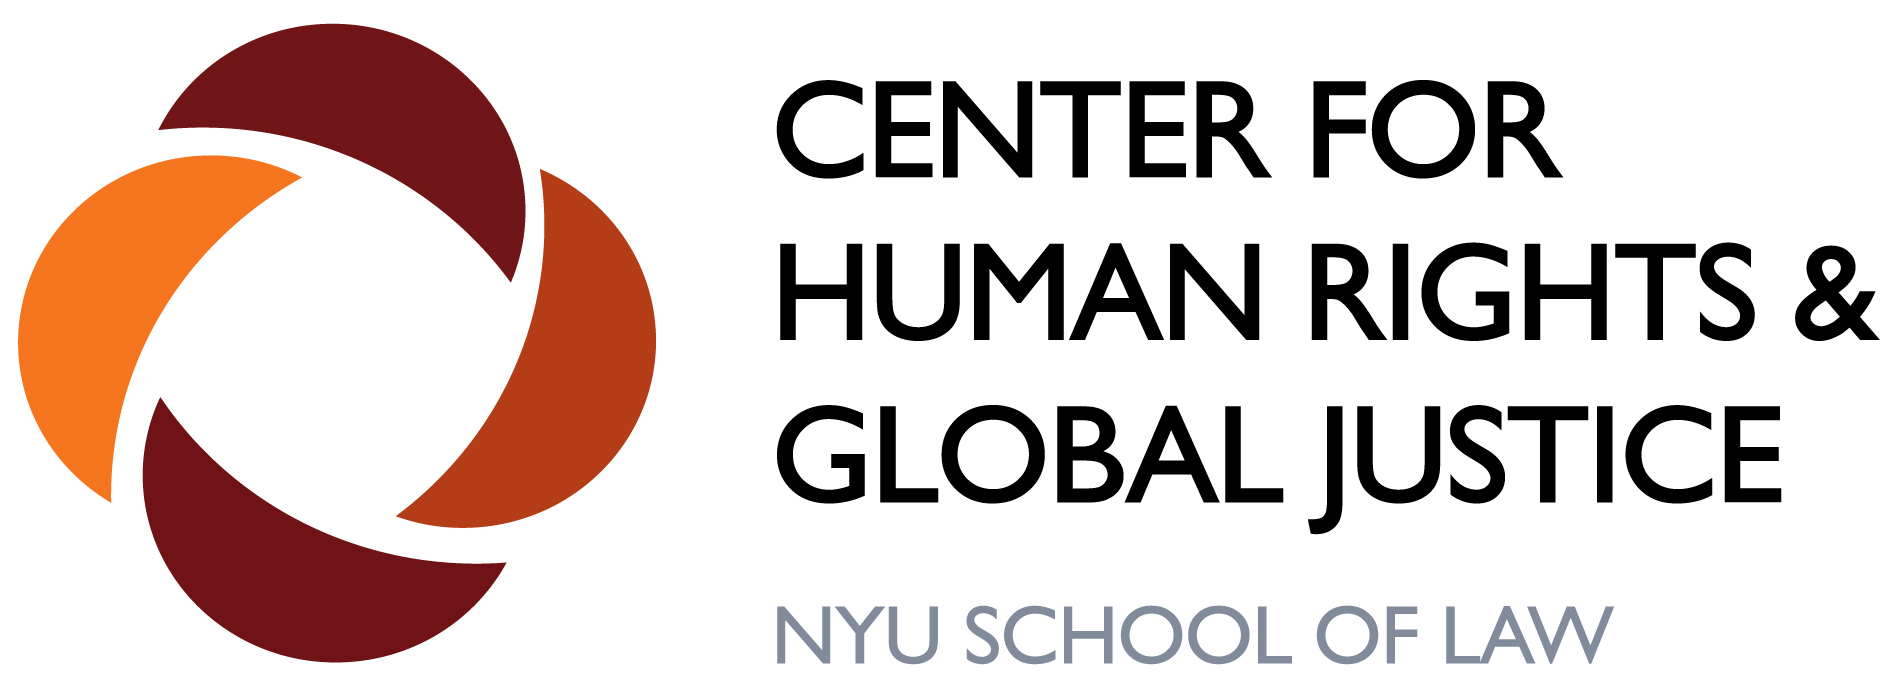 Center for Human Rights & Global Justice